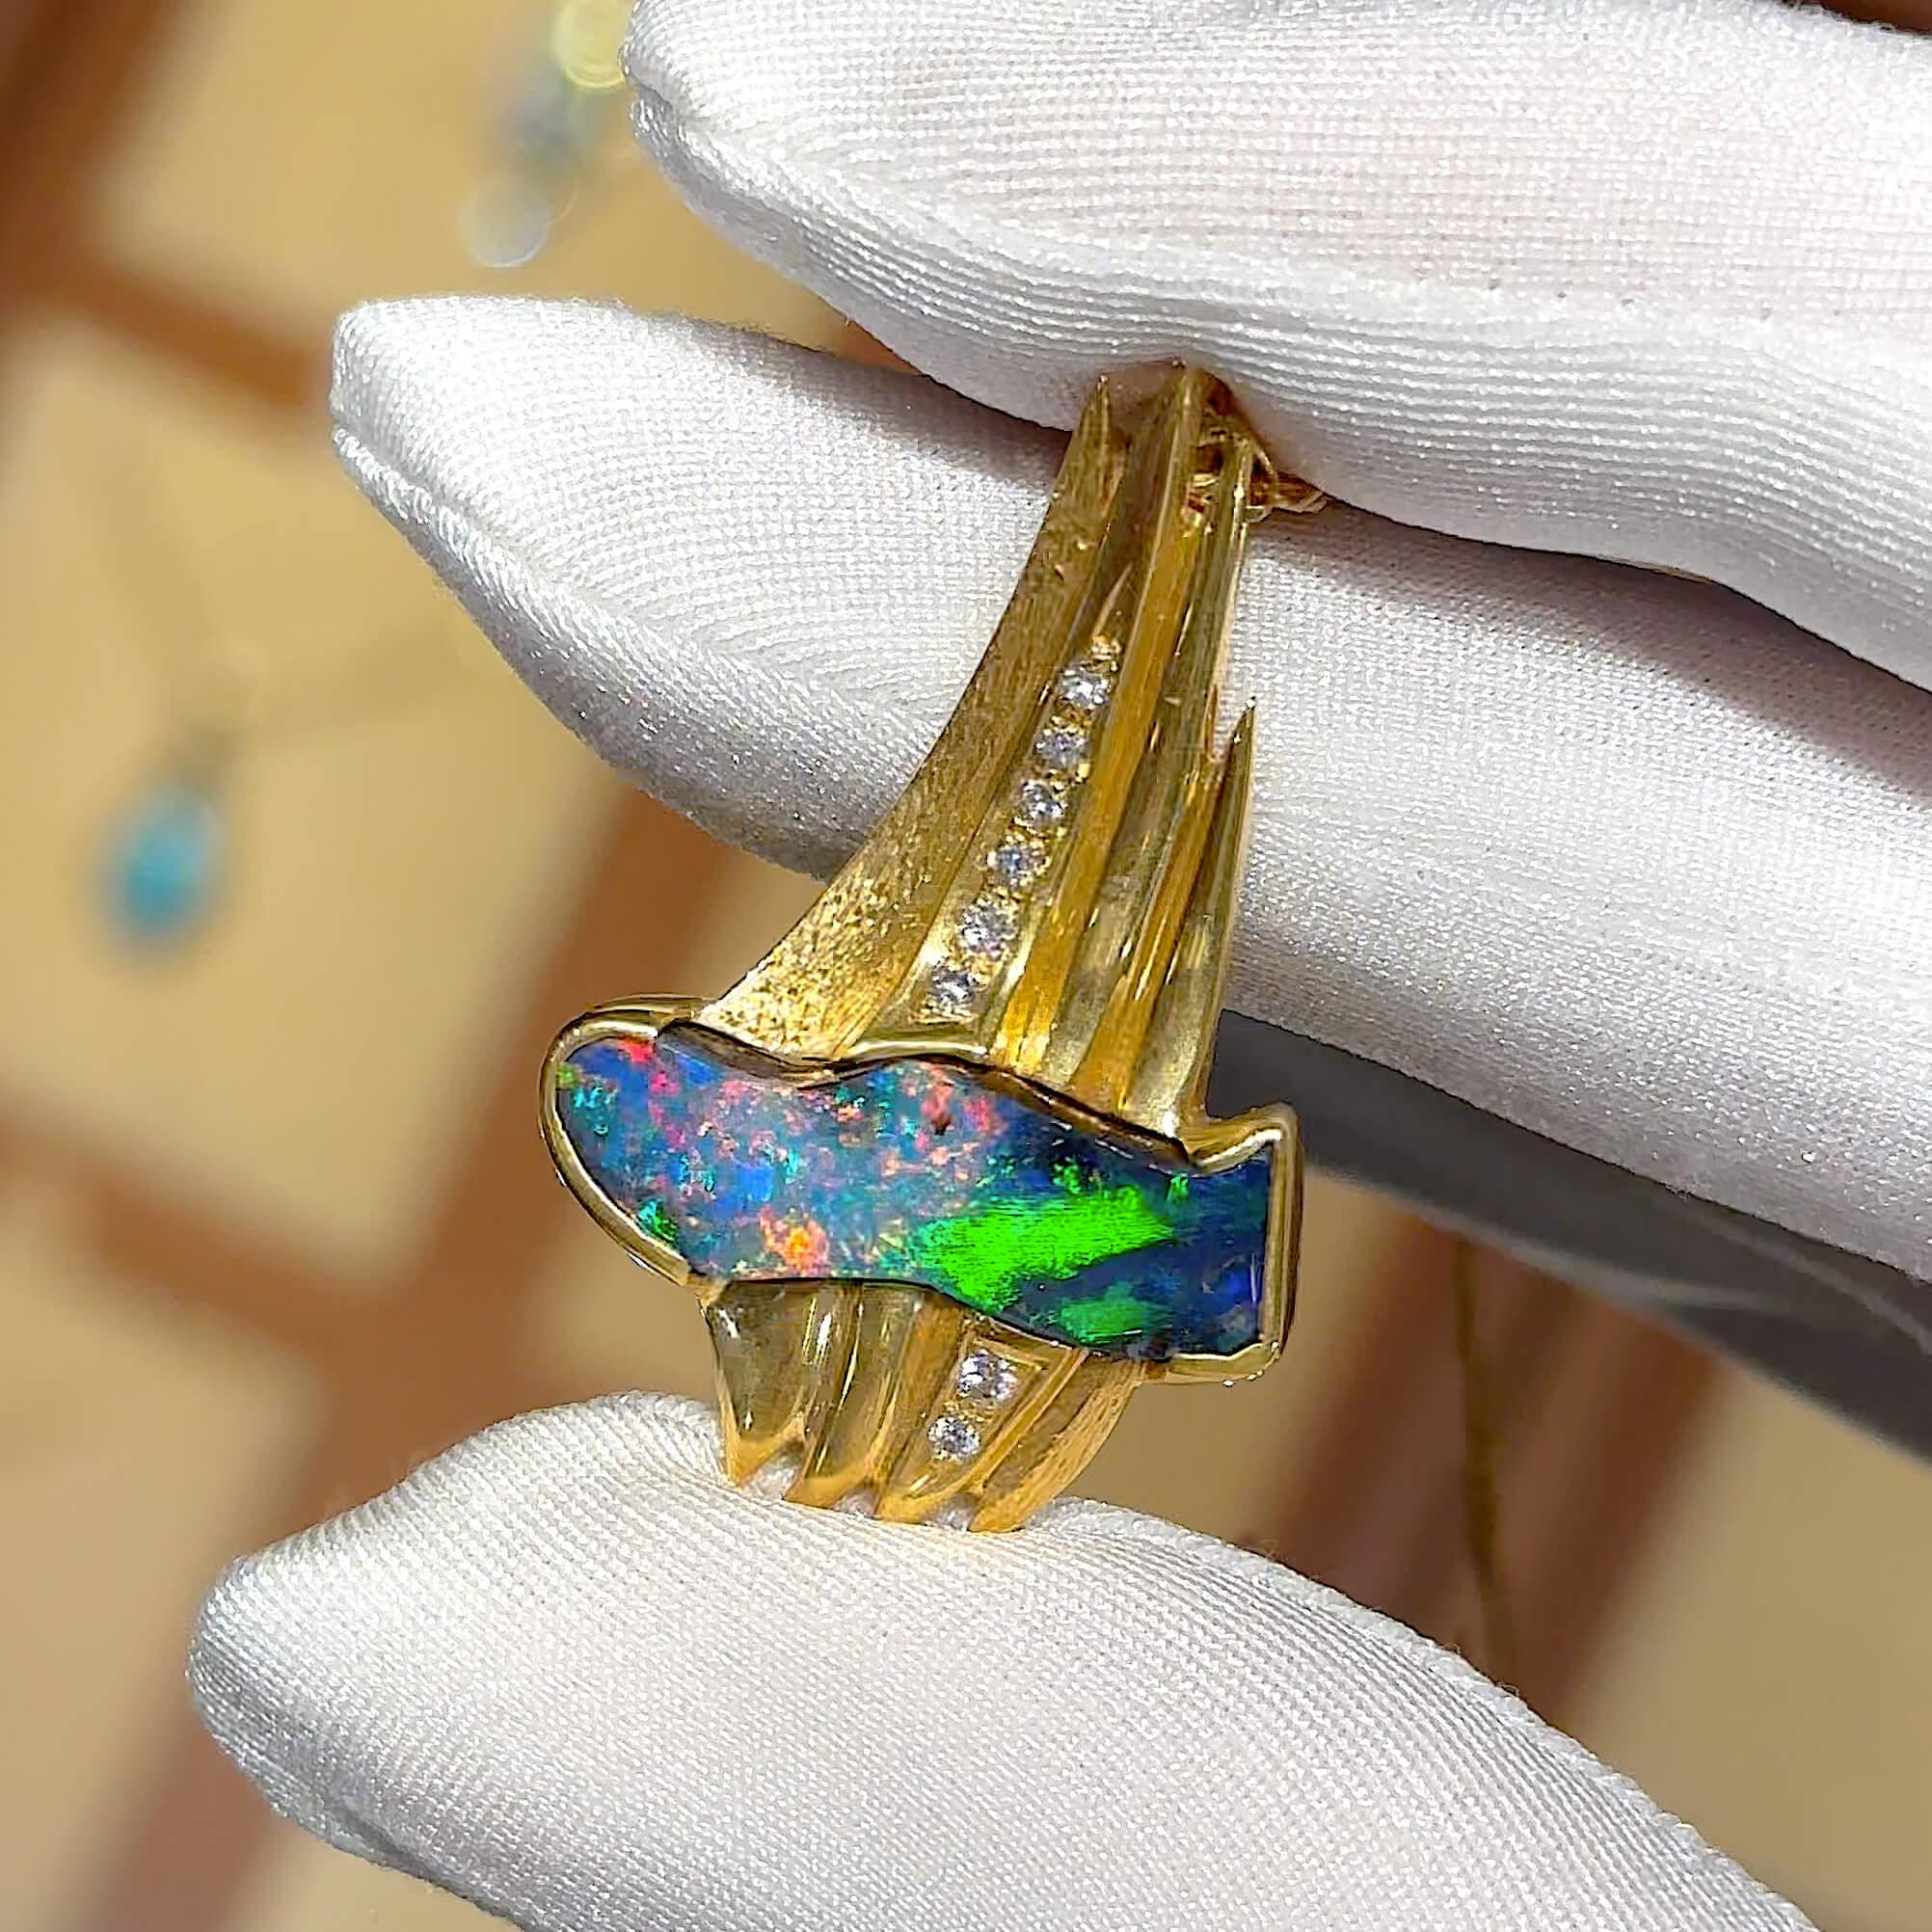 What an amazing black boulder opal we have here. Bright reds, greens and blues in this bespoke pendant setting. 18K solid gold and high jewellery grade diamonds add to the collectors status of this stunning pendant.

SPECIFICATIONS
Opal Type: Black